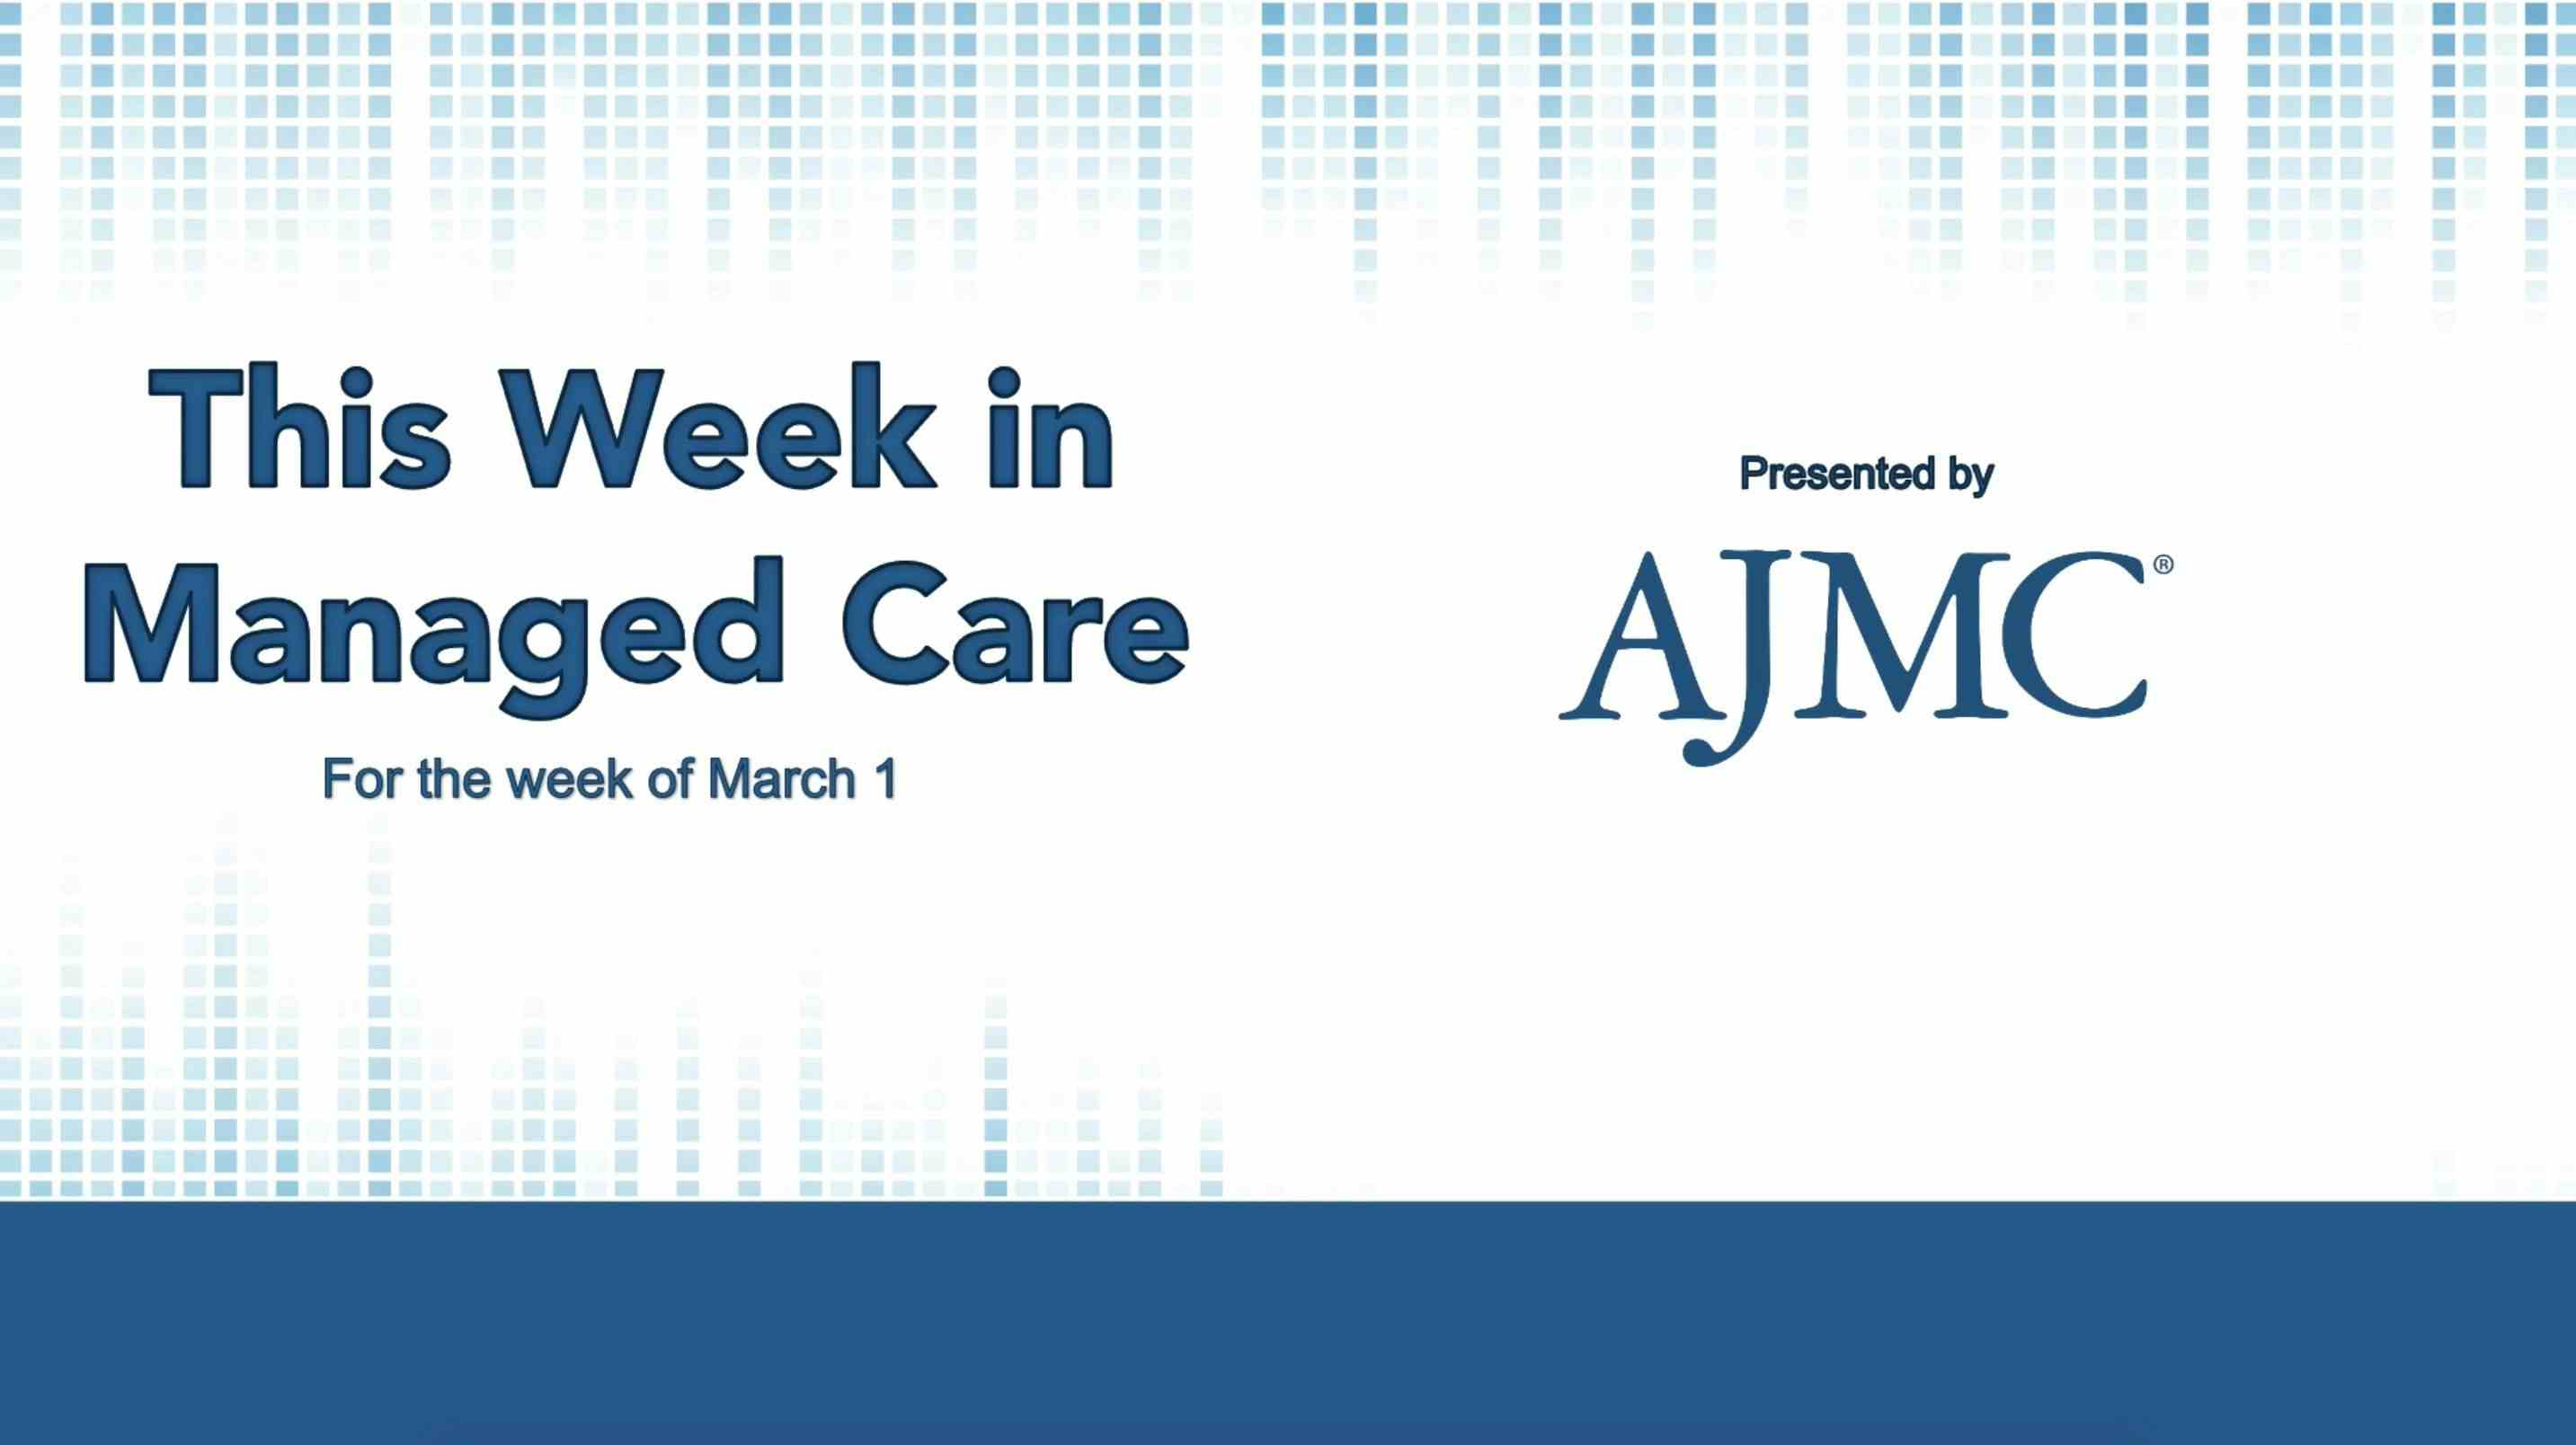 This Week in Managed Care: March 5, 2021